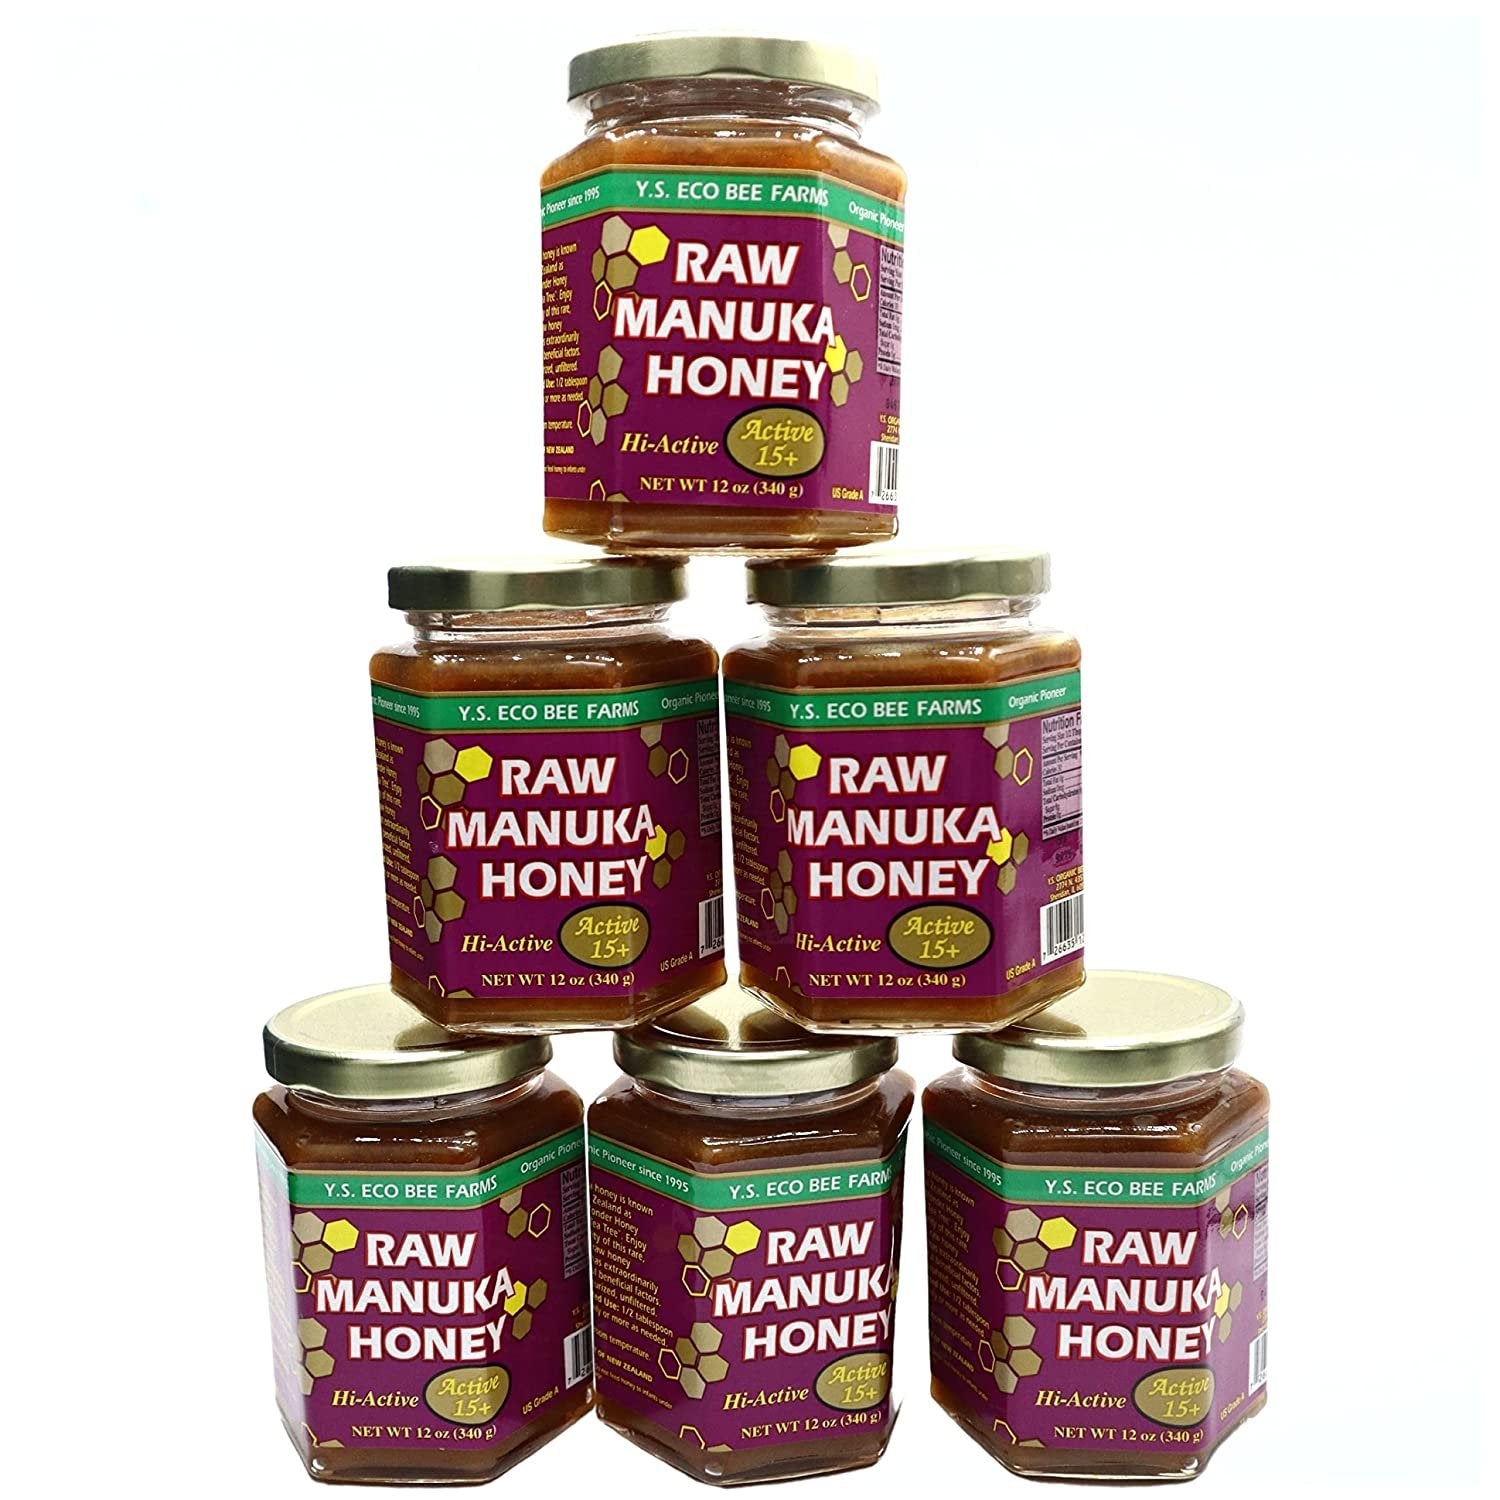 Y.S. Eco Bee Farms, 100% Certified Raw Manuka Honey, Hi-Active, Active 15plus, Unpasteurized, Unfiltered, Rare, Exotic, Raw, Kosher, Gluten Free, "The Wonder Honey Of The Tea Tree", 12 Oz - 6 Jars